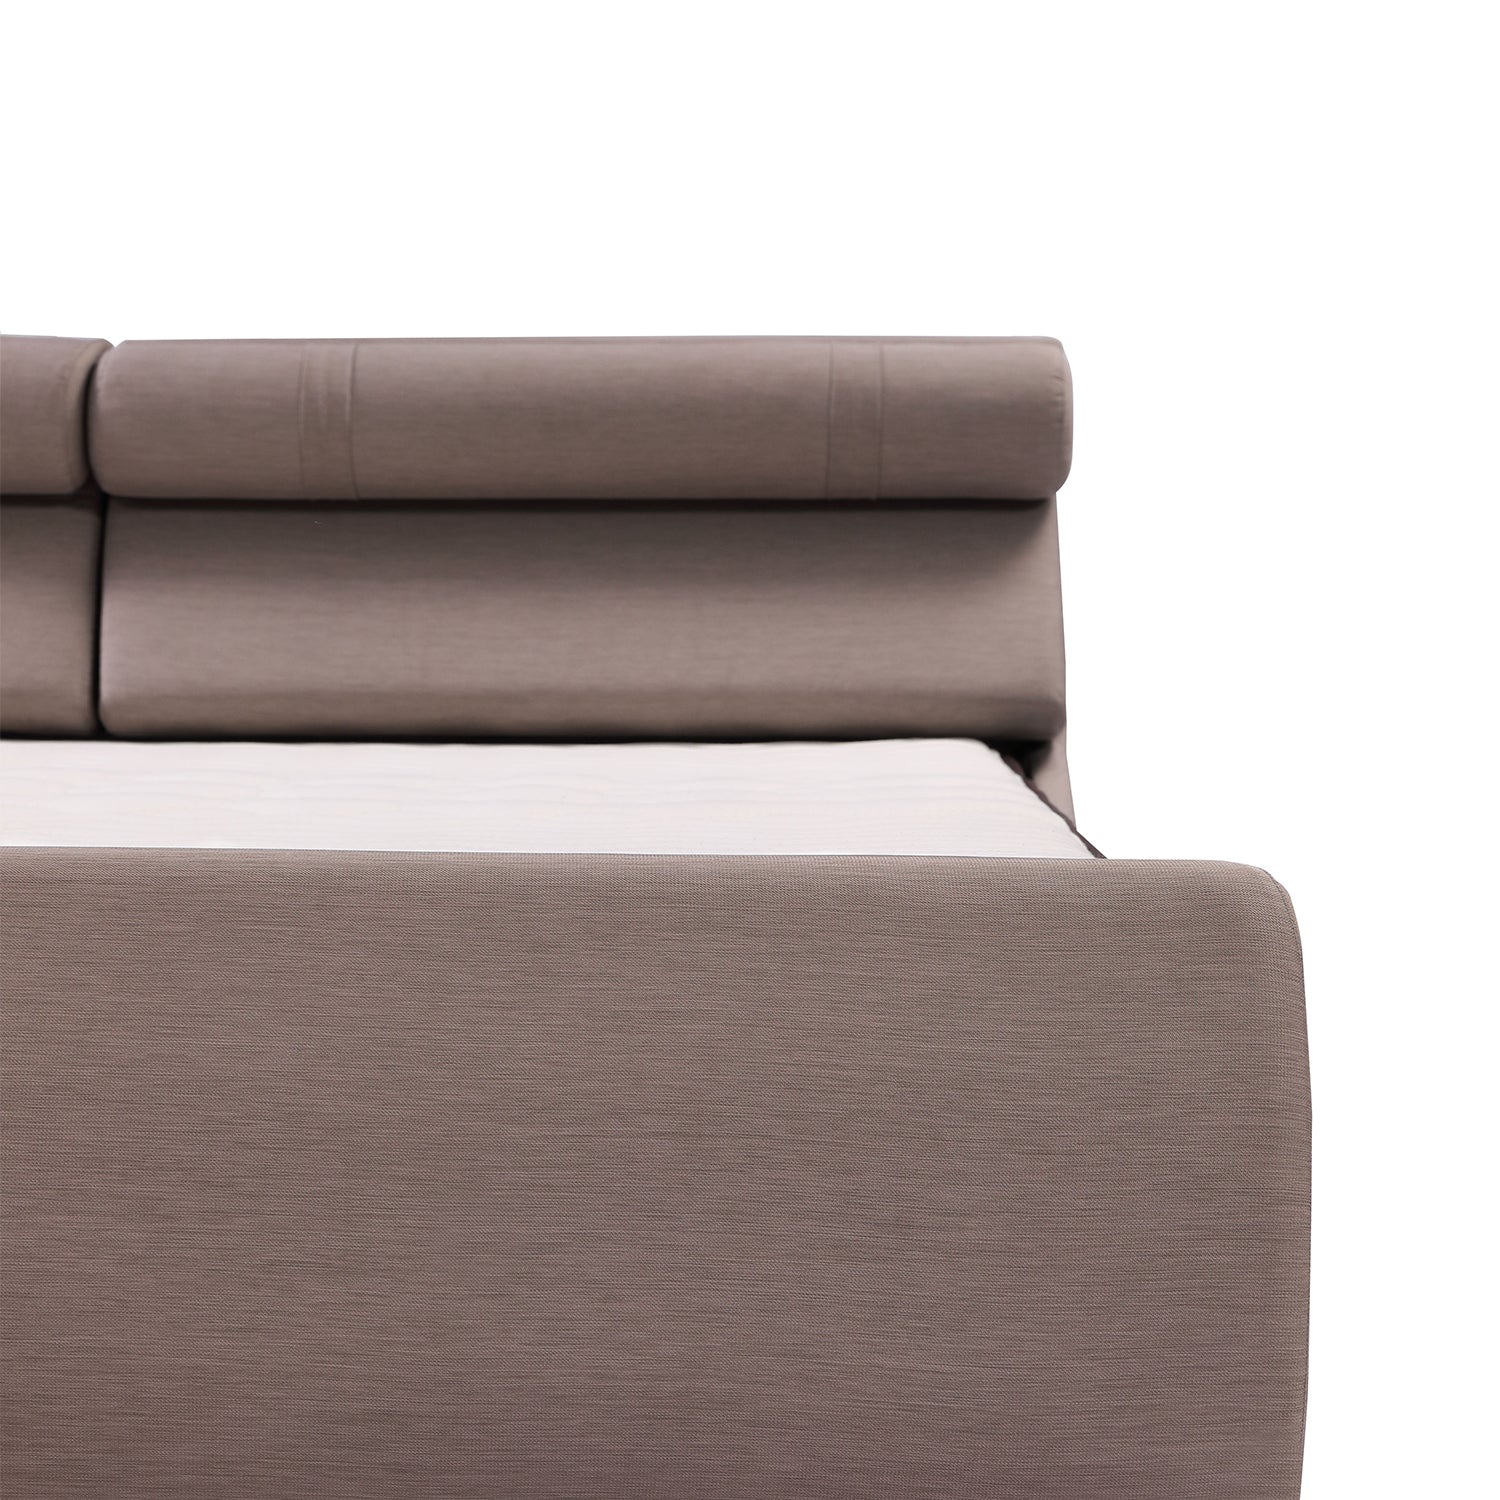 Close-up of the headboard and frame of the DeRUCCI Bed Frame BZZ4 - 093C with beige fabric upholstery, illustrating its sleek and modern design.